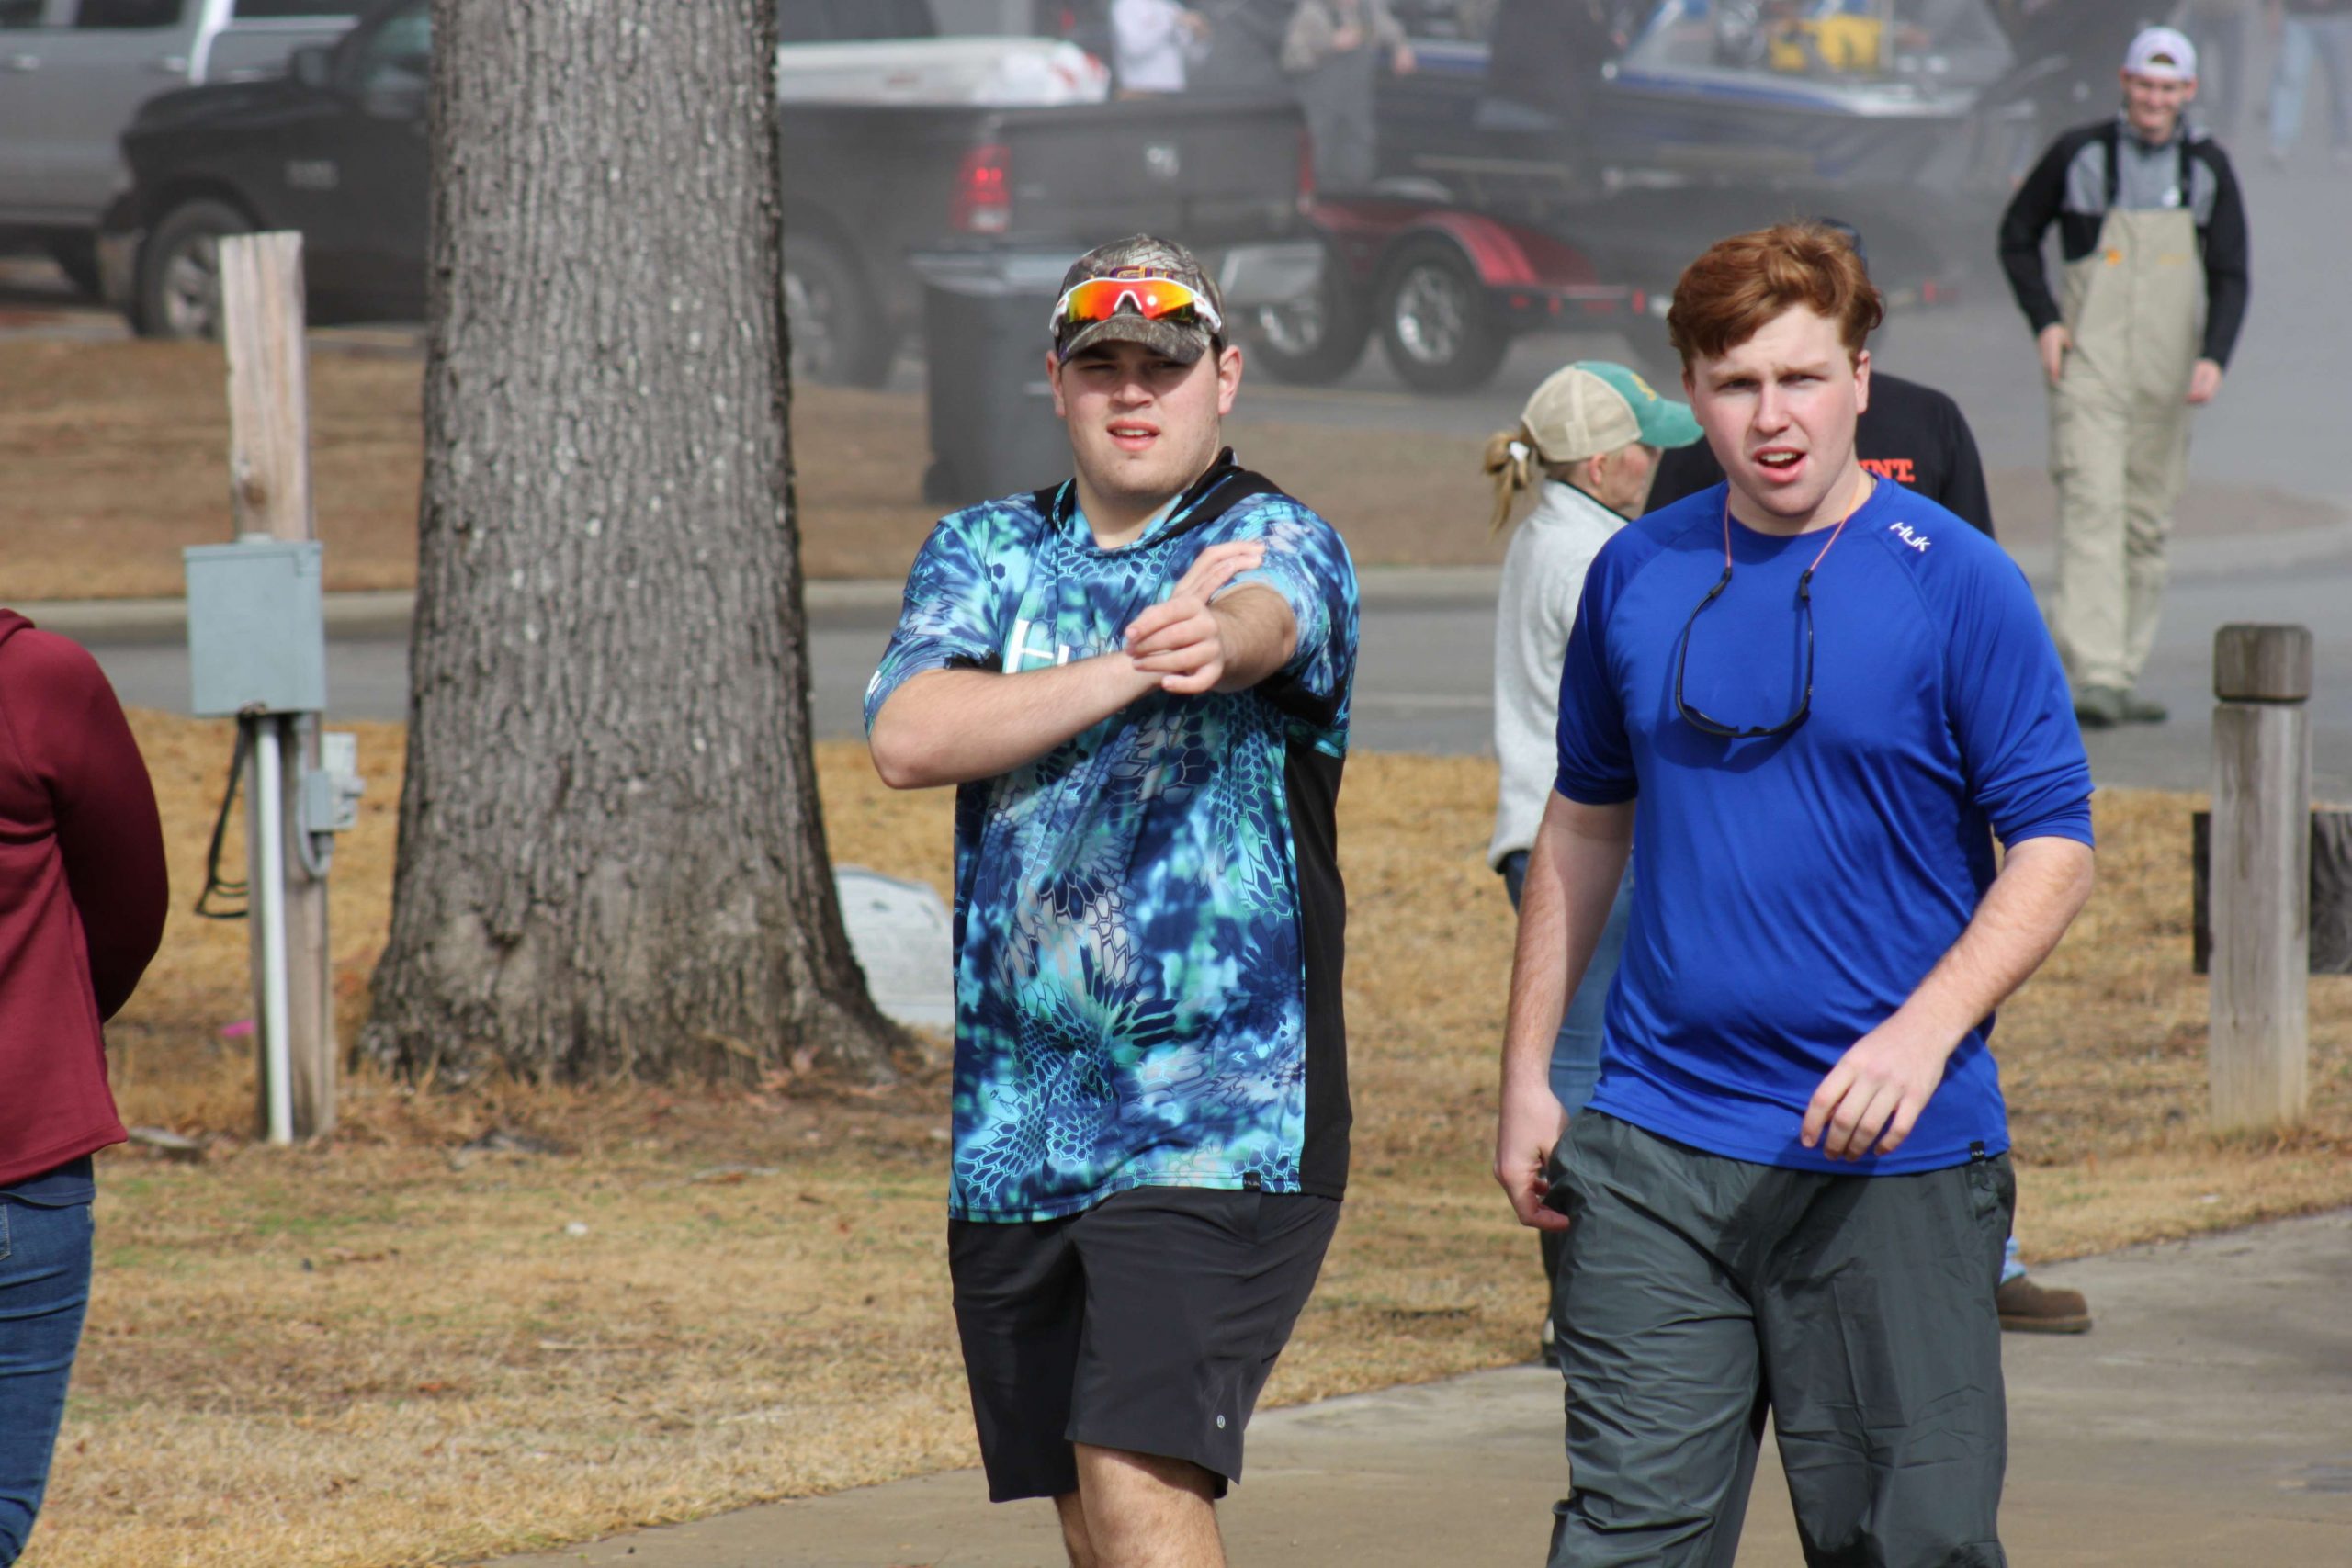 These two teenage anglers make their way to the registration area ahead of the crowd.